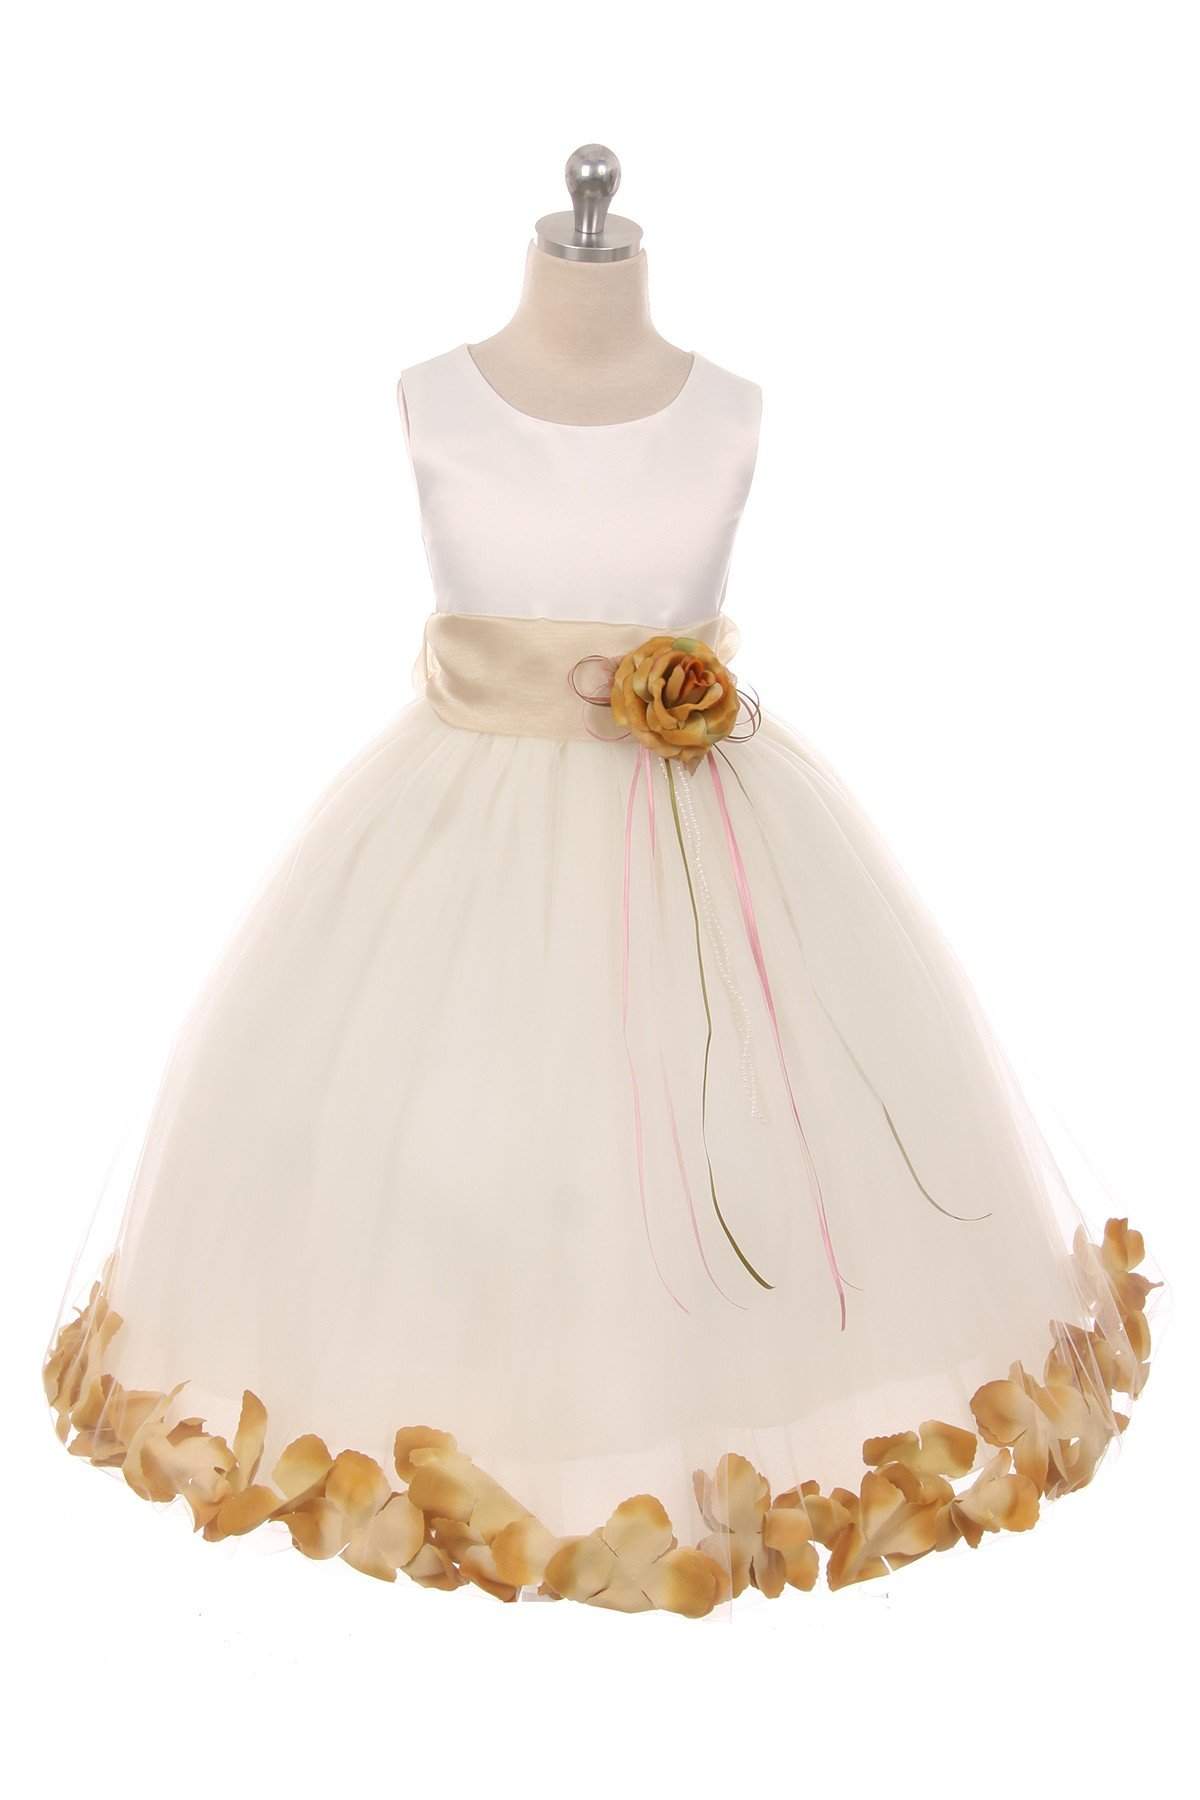 Satin Flower Petal Dress (8 Colors)-Kid's Dream-1_2,3_4,5_6,7_8,big_girl,color_Aqua,Color_Black,color_Blue,color_Champagne,color_Dusty Rose,Color_Fuchsia,color_Ivory,Color_Pink,Color_Red,color_White,color_Yellow,fabric_Satin,length_Tea Length,little_girl,meta-related-collection-shop-the-outfit-girls,size_10,size_12,size_14